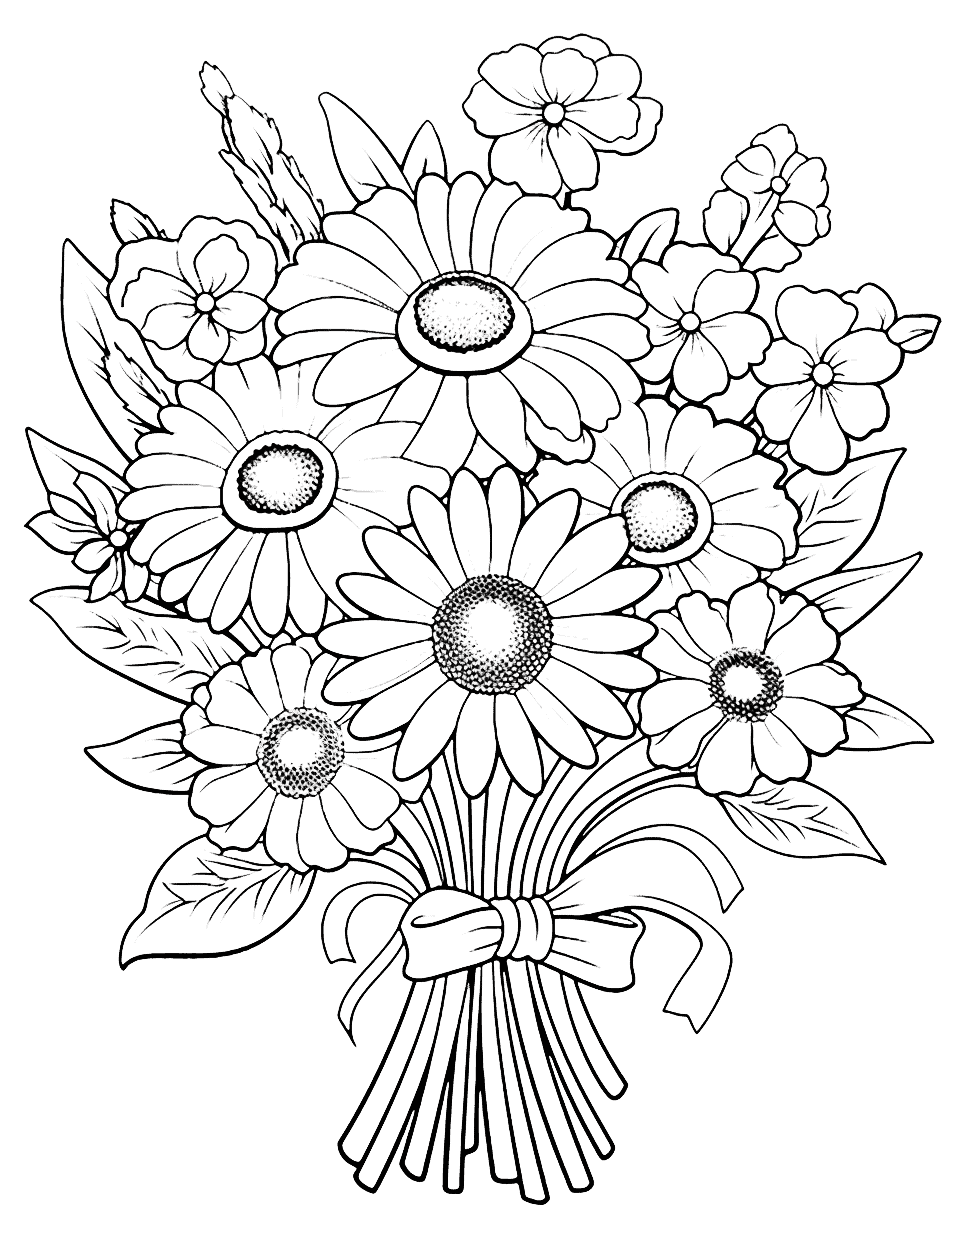 Flower Bouquet Cute Coloring Page - A bouquet of different flowers, including roses, daisies, and sunflowers.